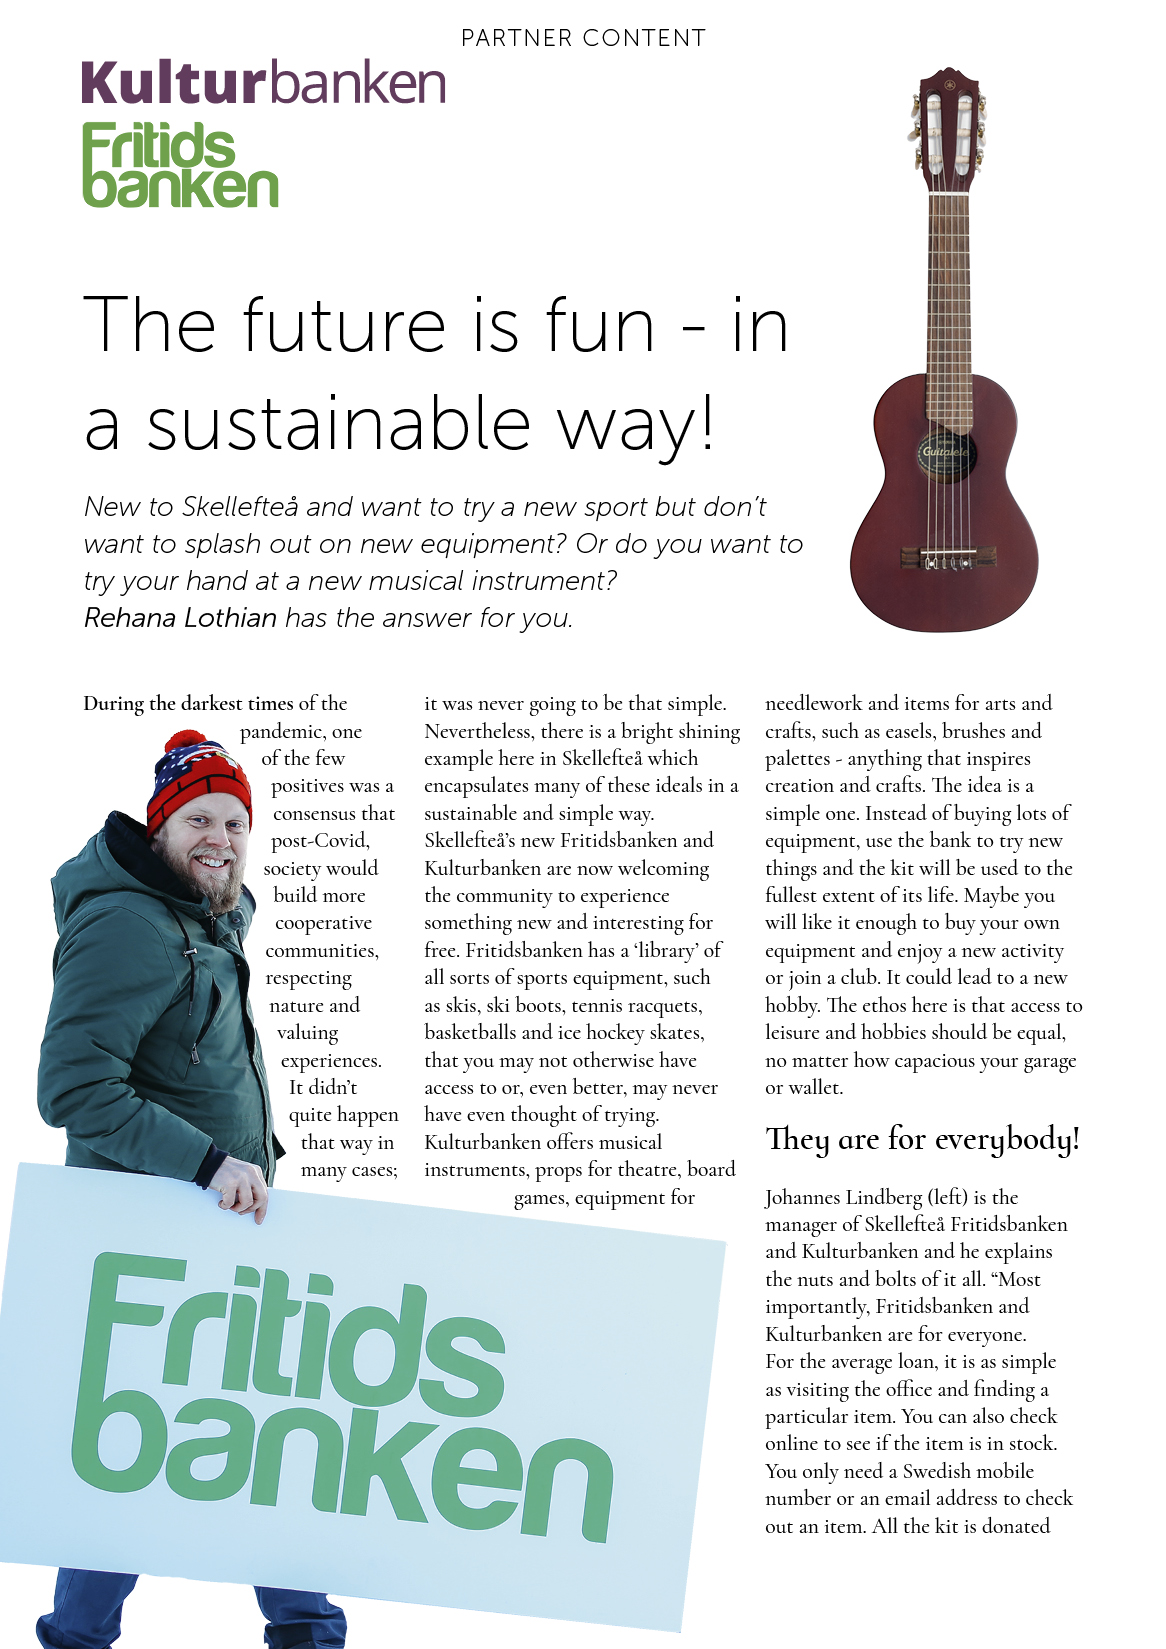 The future is fun - in a sustainable way!